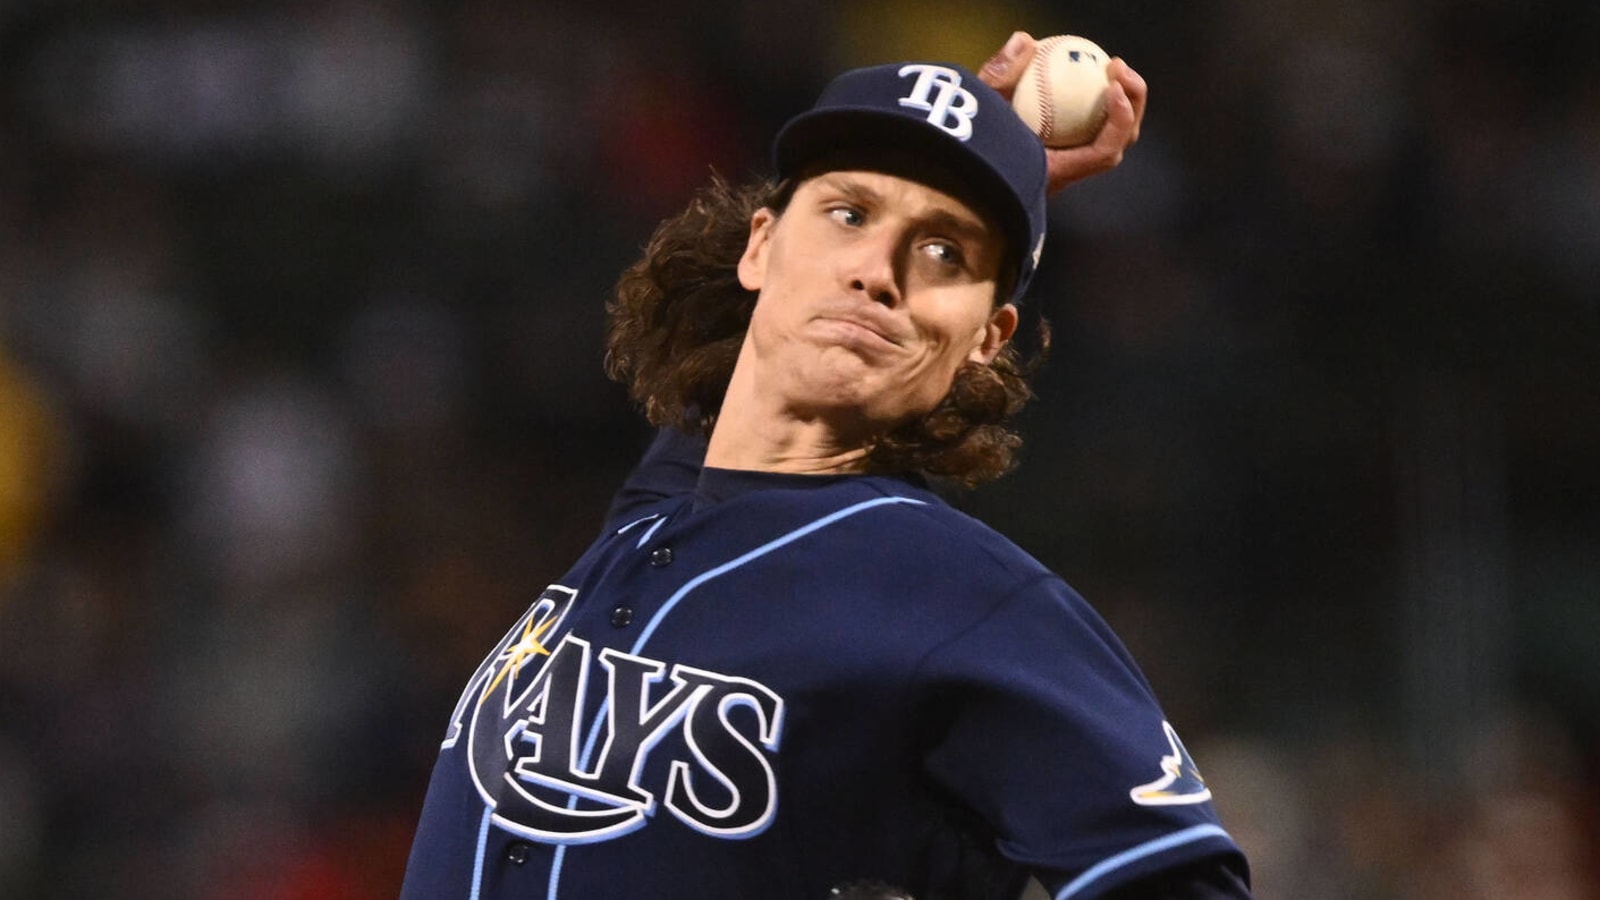 Rays ace on pace to make season debut next weekend